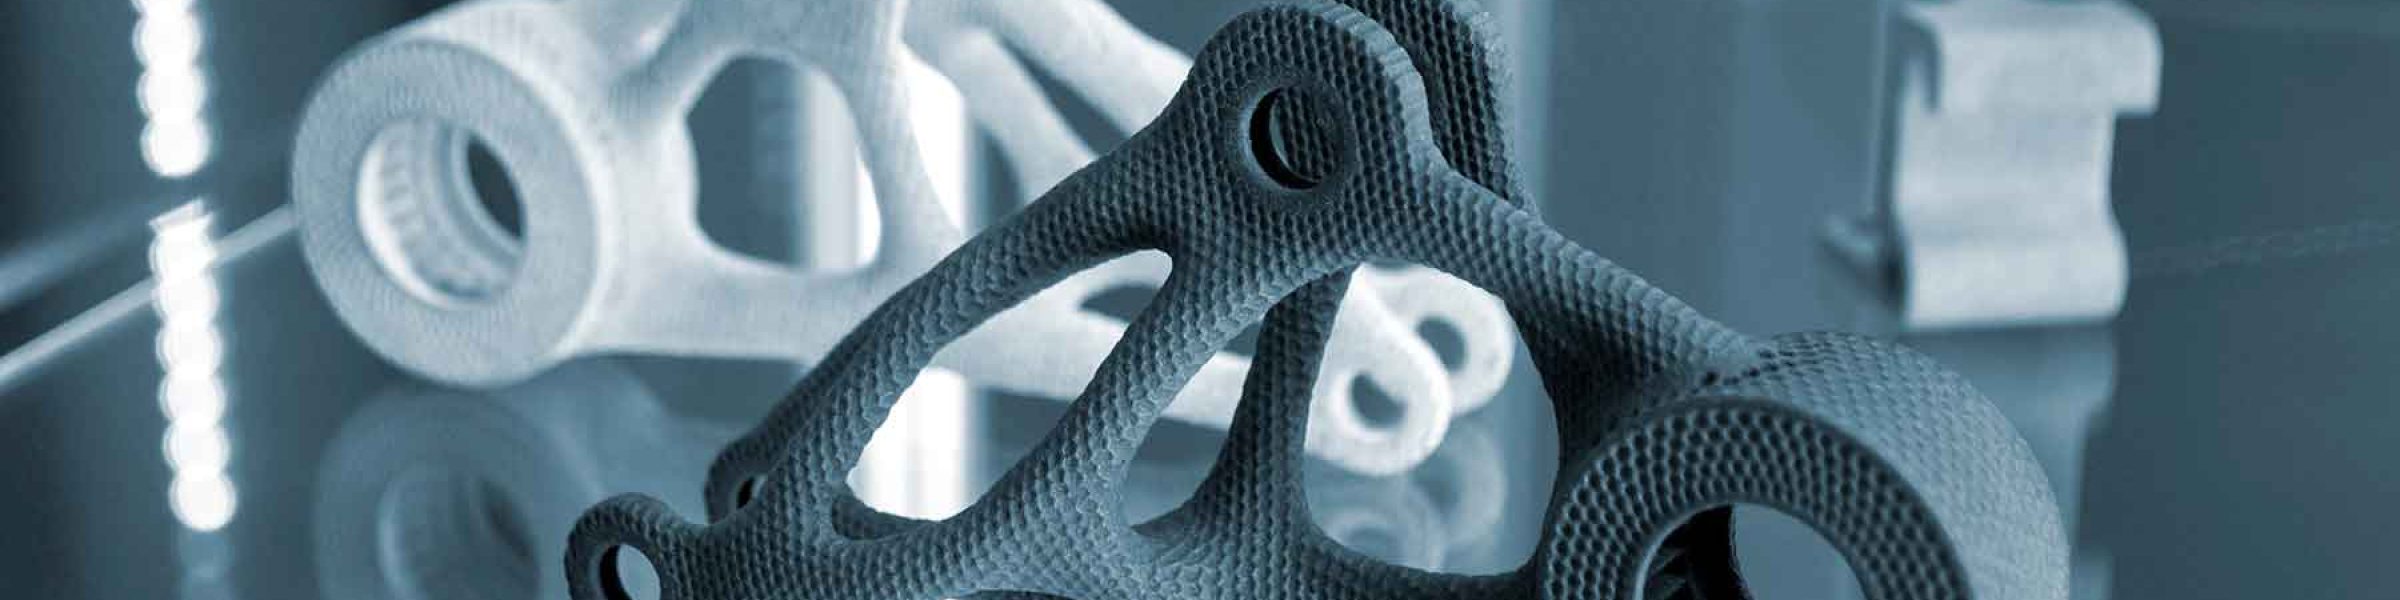 Additive-Manufacturing---Rapid-Prototyping